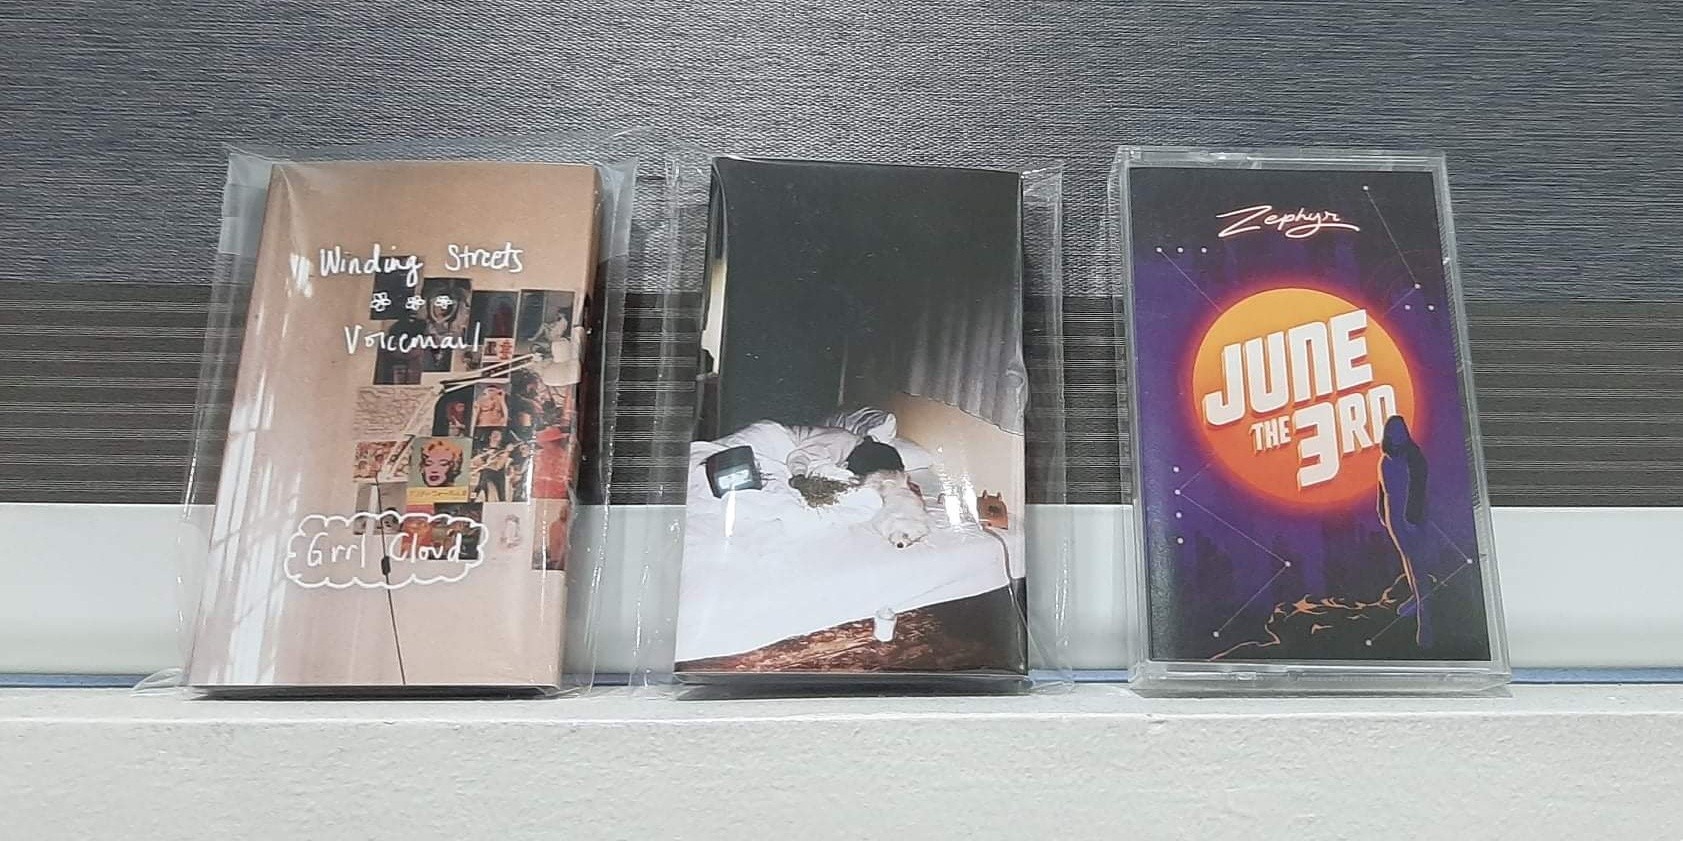 Here are the special releases of Cassette Store Day Philippines 2019